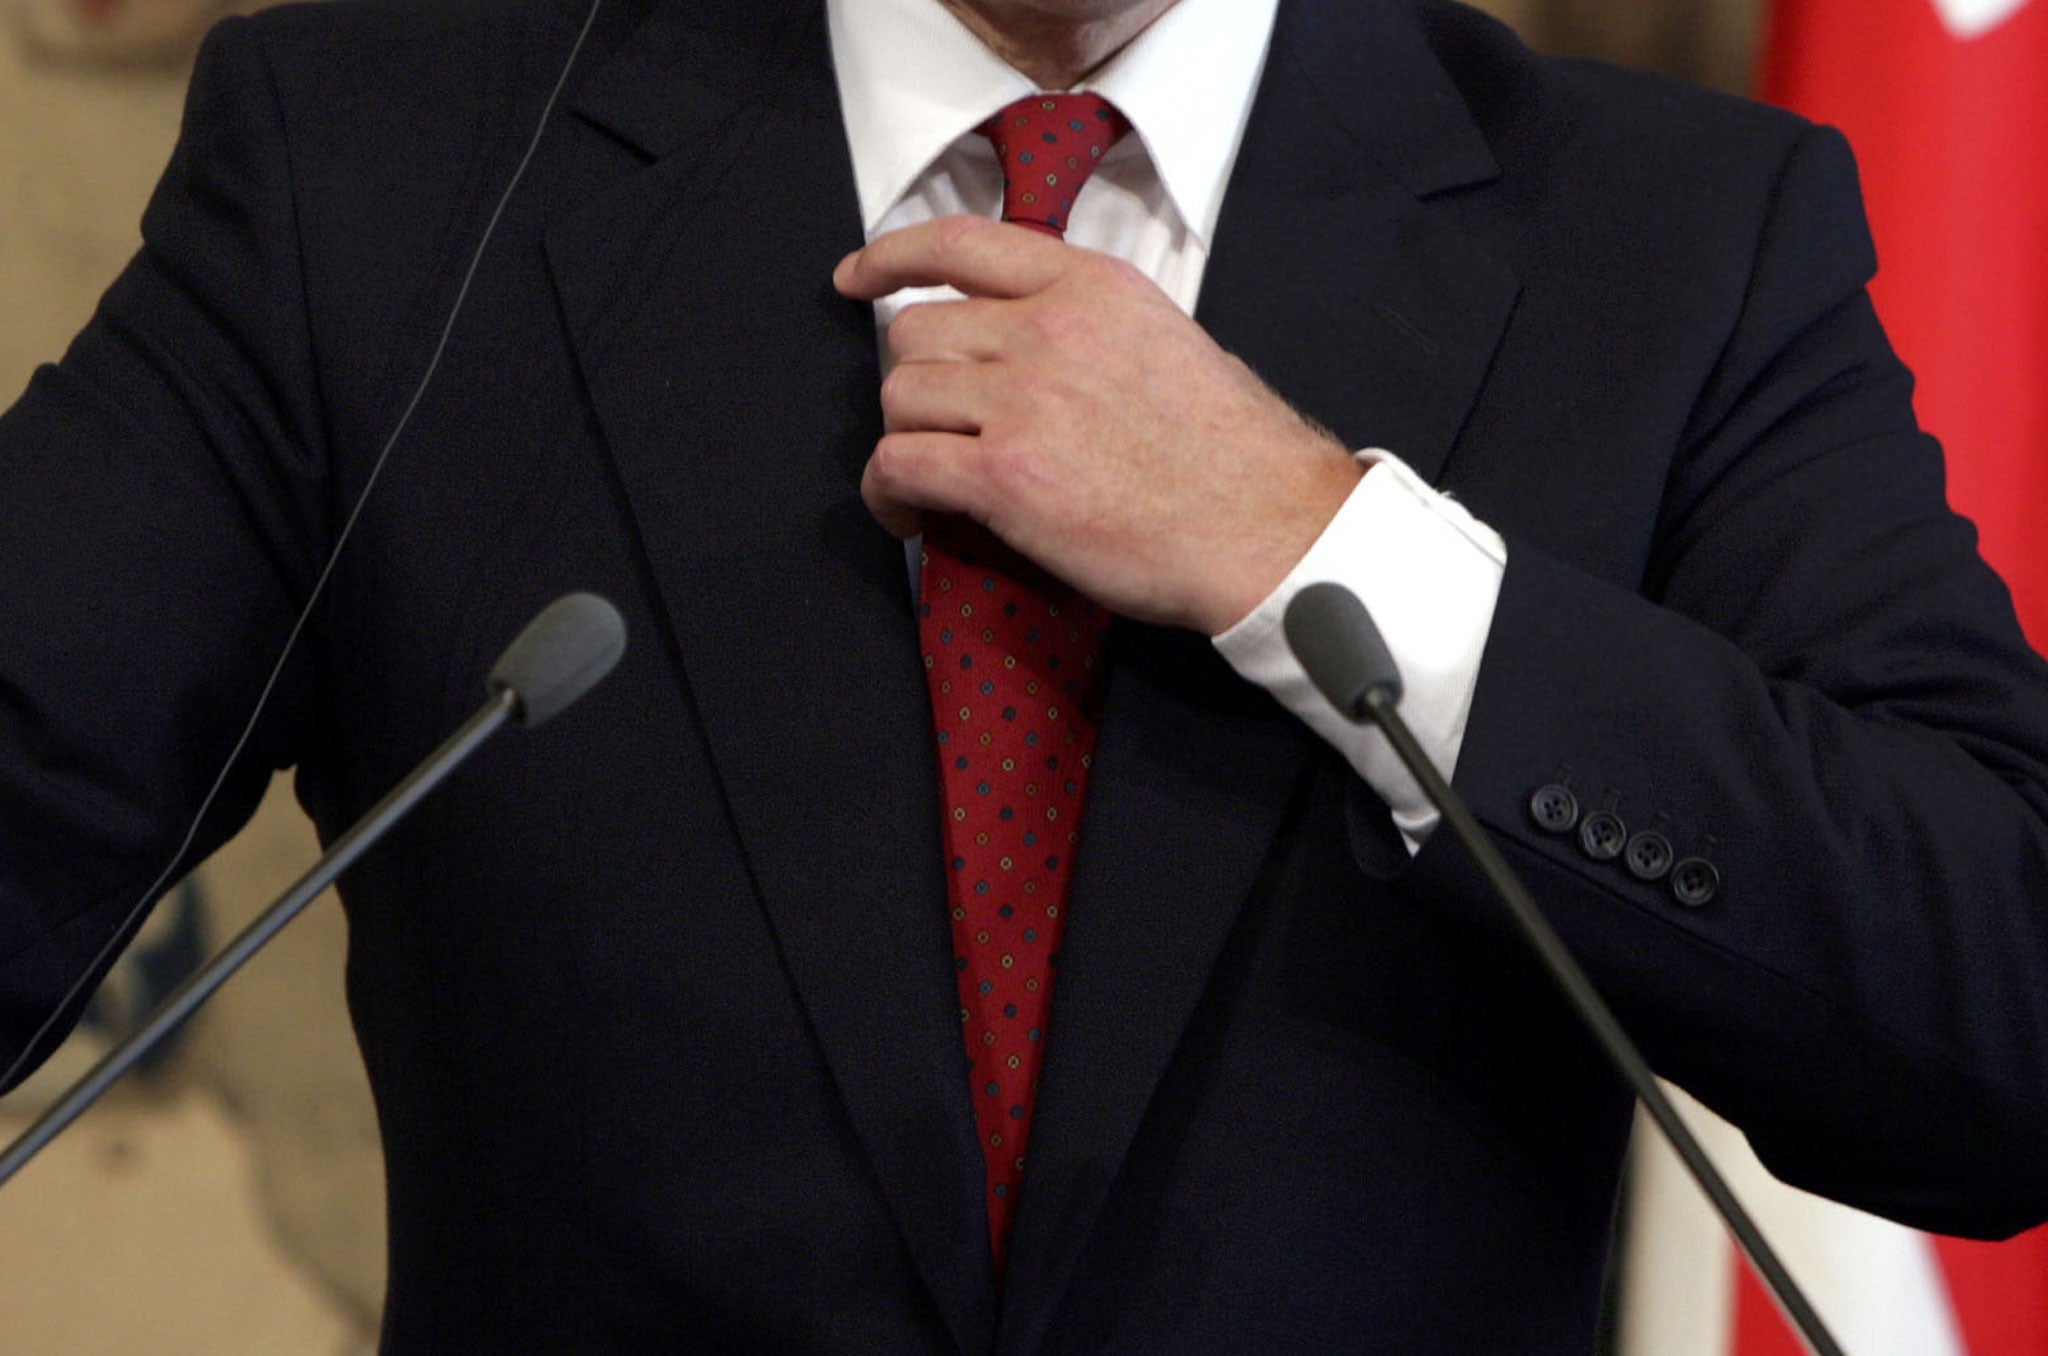 British Prime Minister, Tony Blair adjusts his tie during a press conference with Italian counterpart Silvio Berlusconi at Chigi palace May 27, 2005 in Rome, Italy.